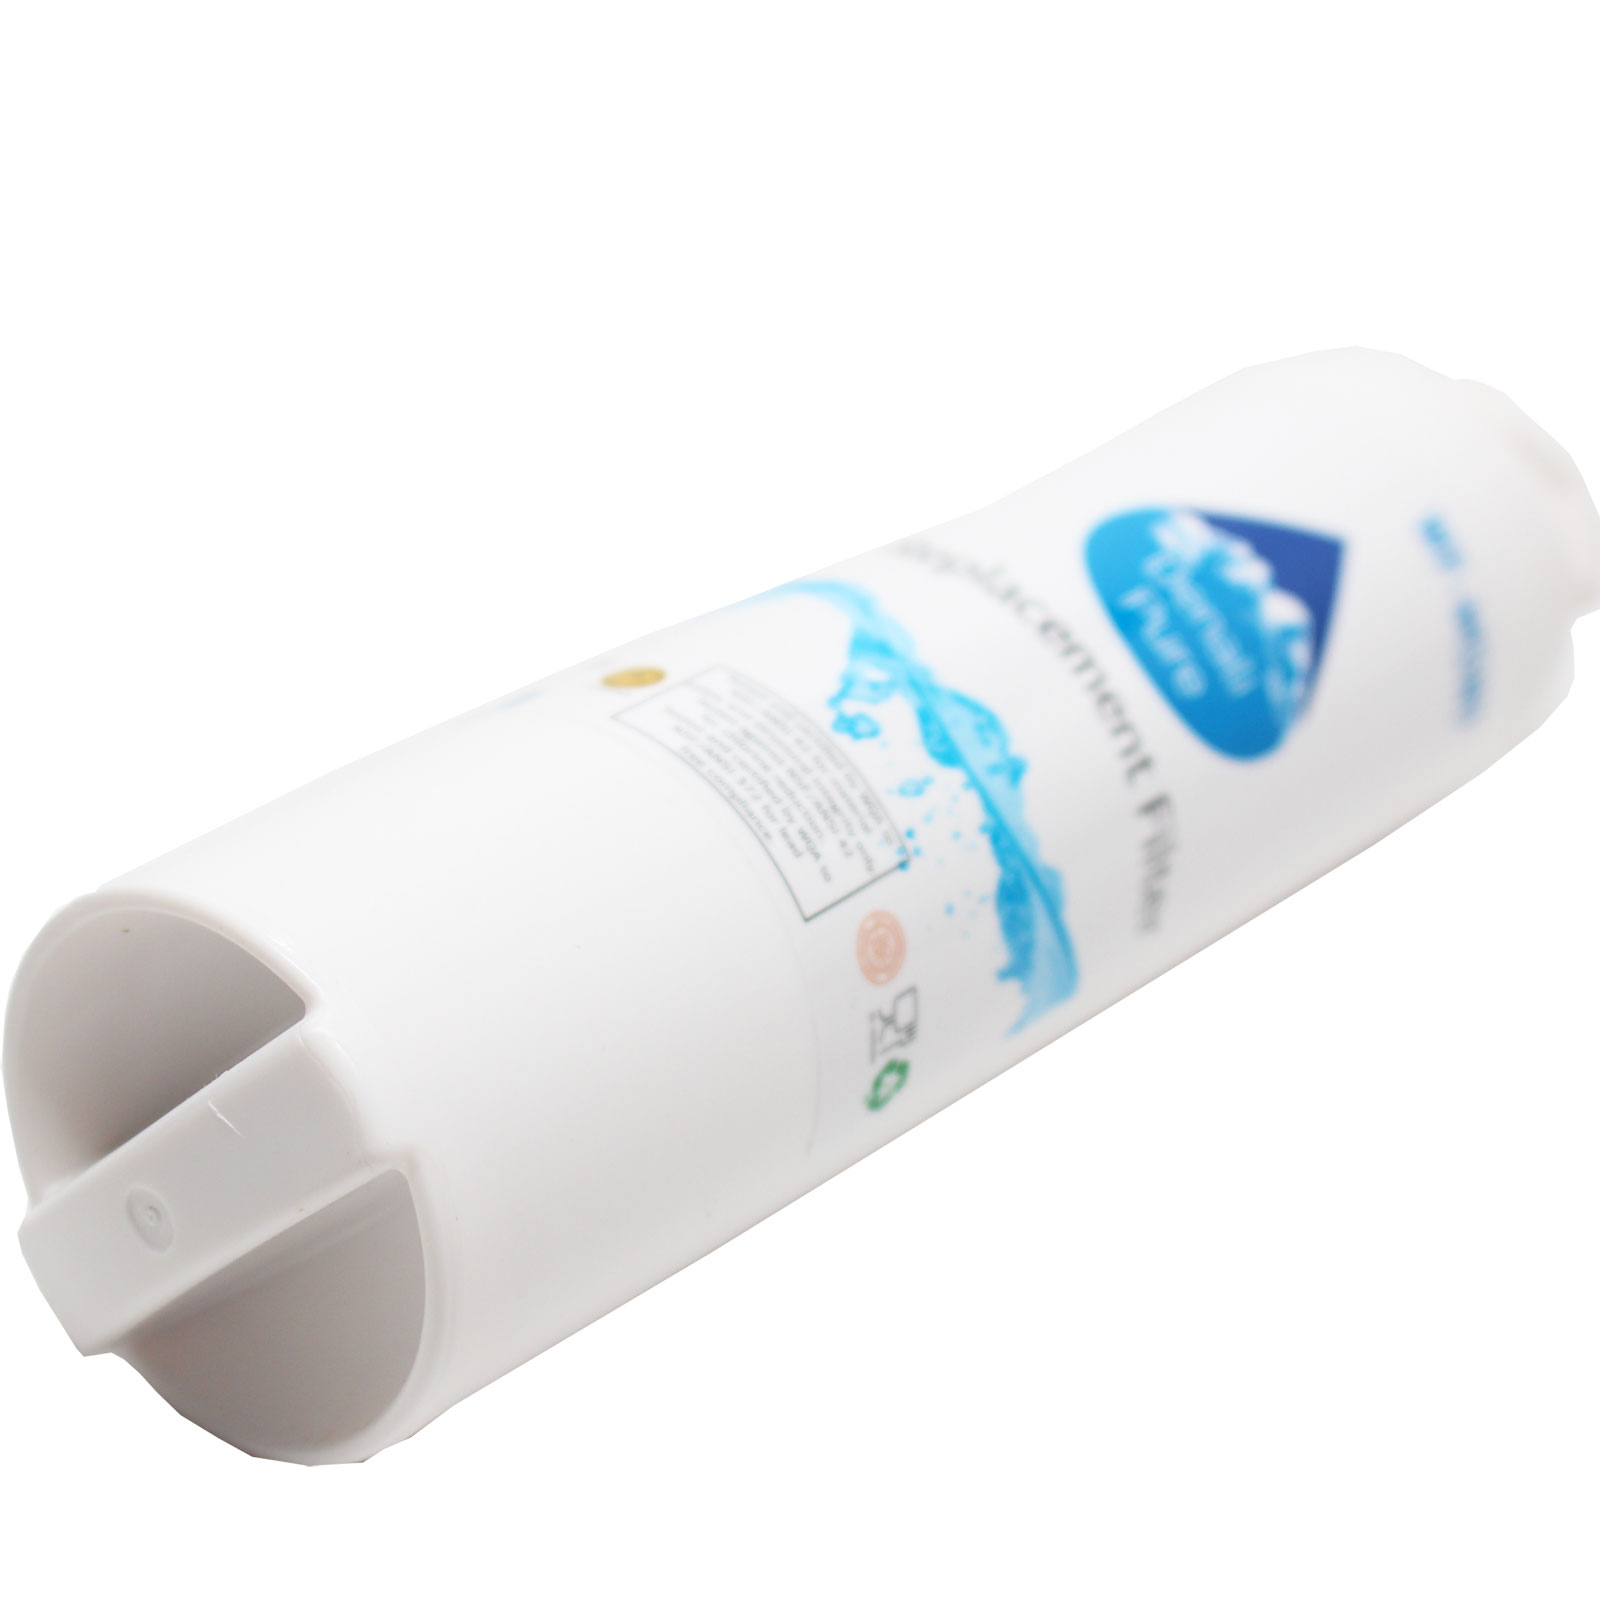 Replacement General Electric PSCS3RGXAFSS Refrigerator Water Filter - Compatible General Electric MSWF Fridge Water Filter Cartridge - image 3 of 4